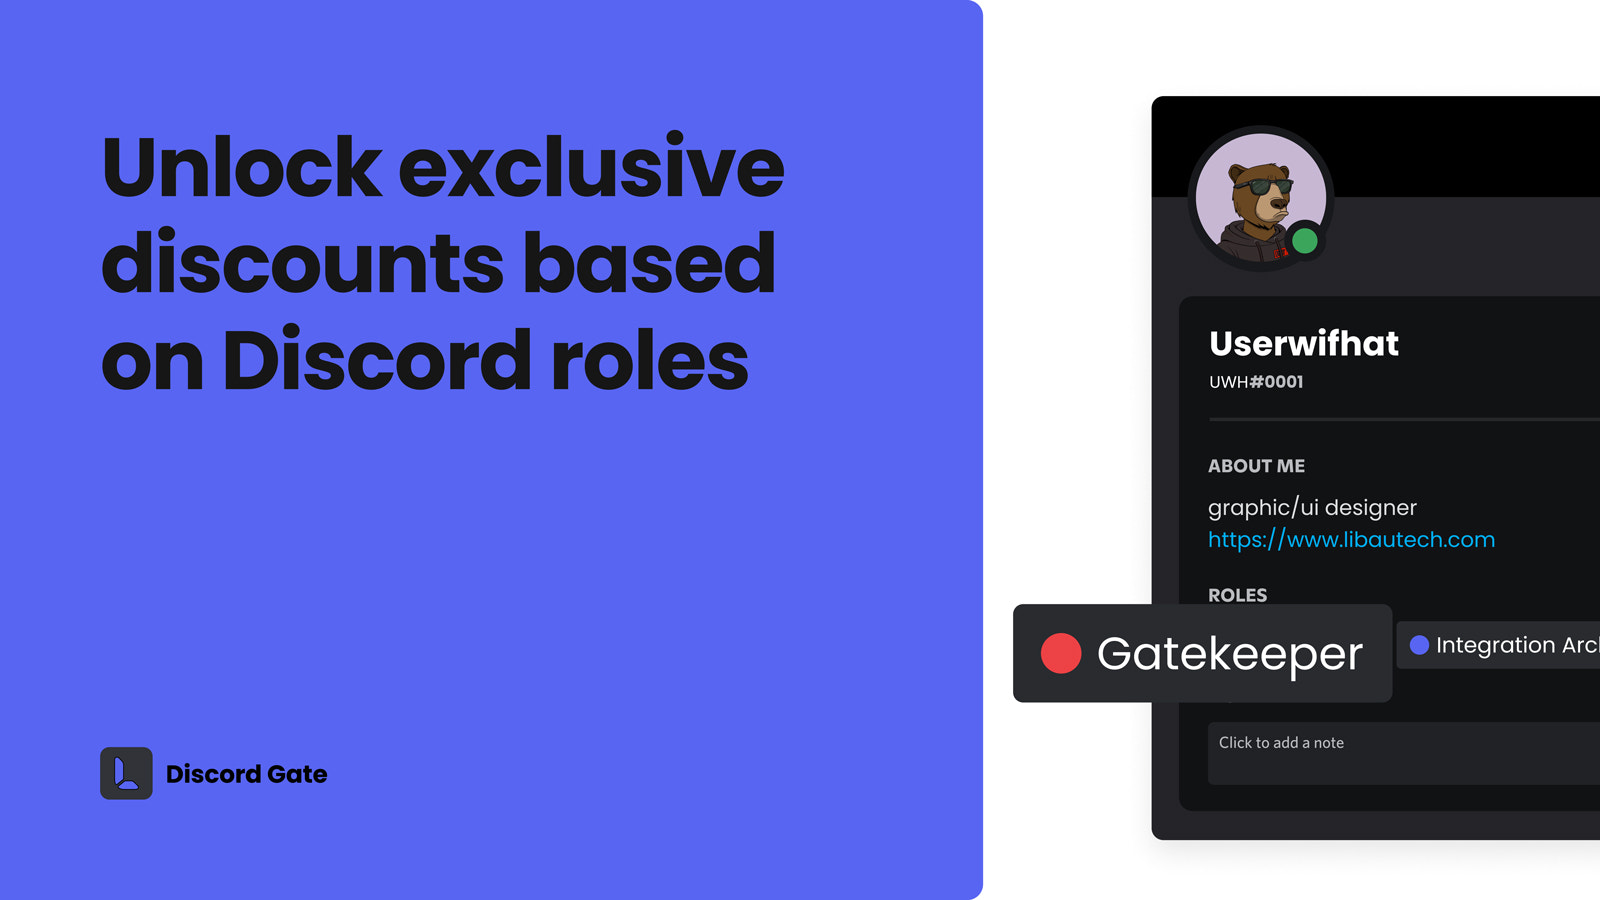 Unlock exclusive discounts based on Discord roles